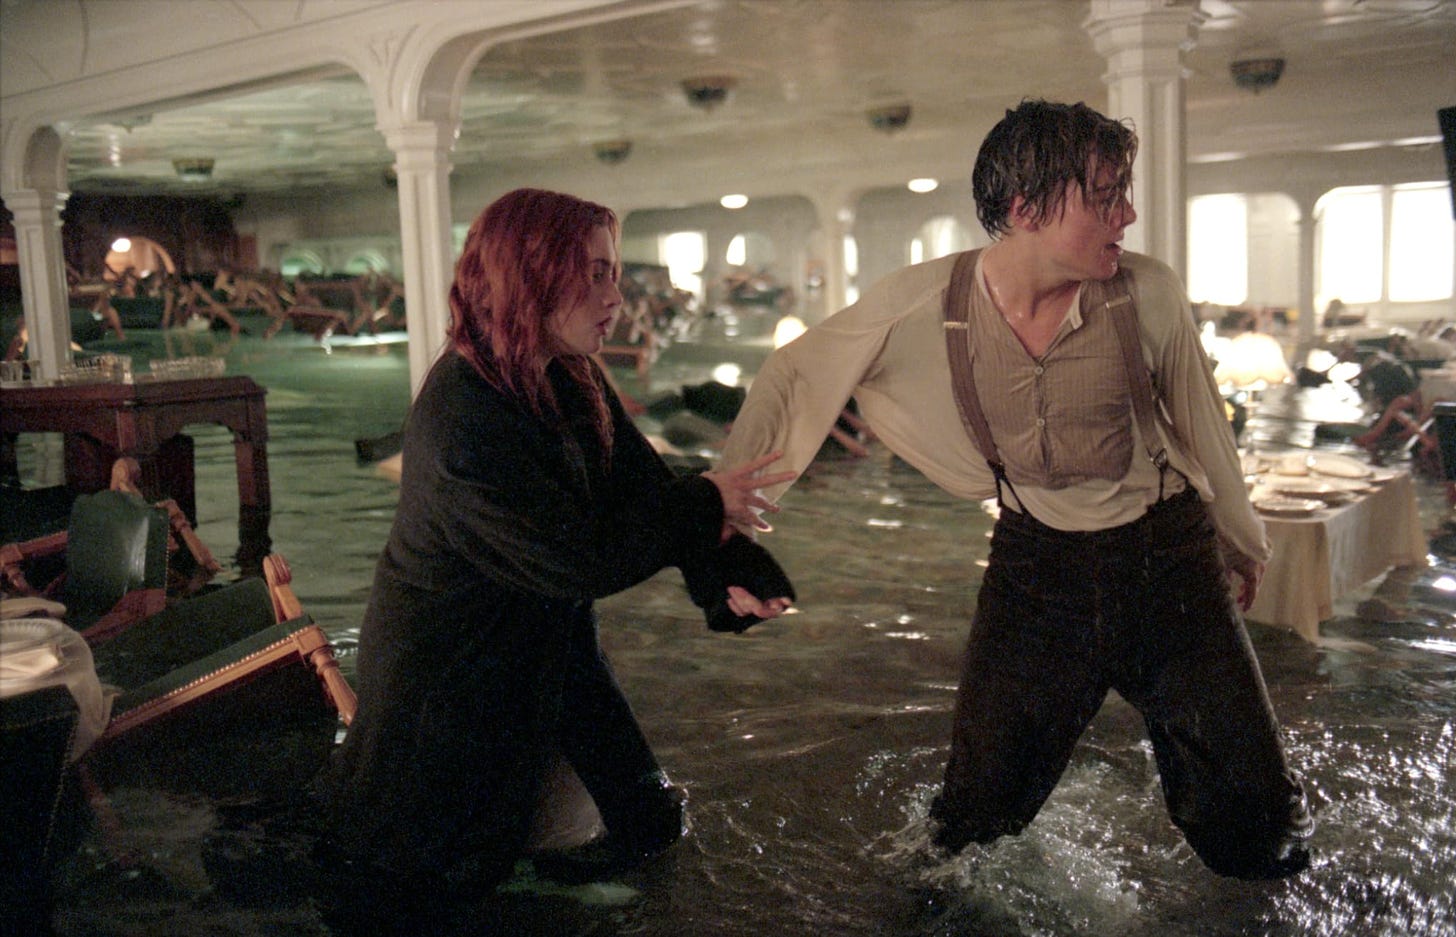 A screenshot from Titanic, showing Jack and Rose wading through water in the ship's interior.